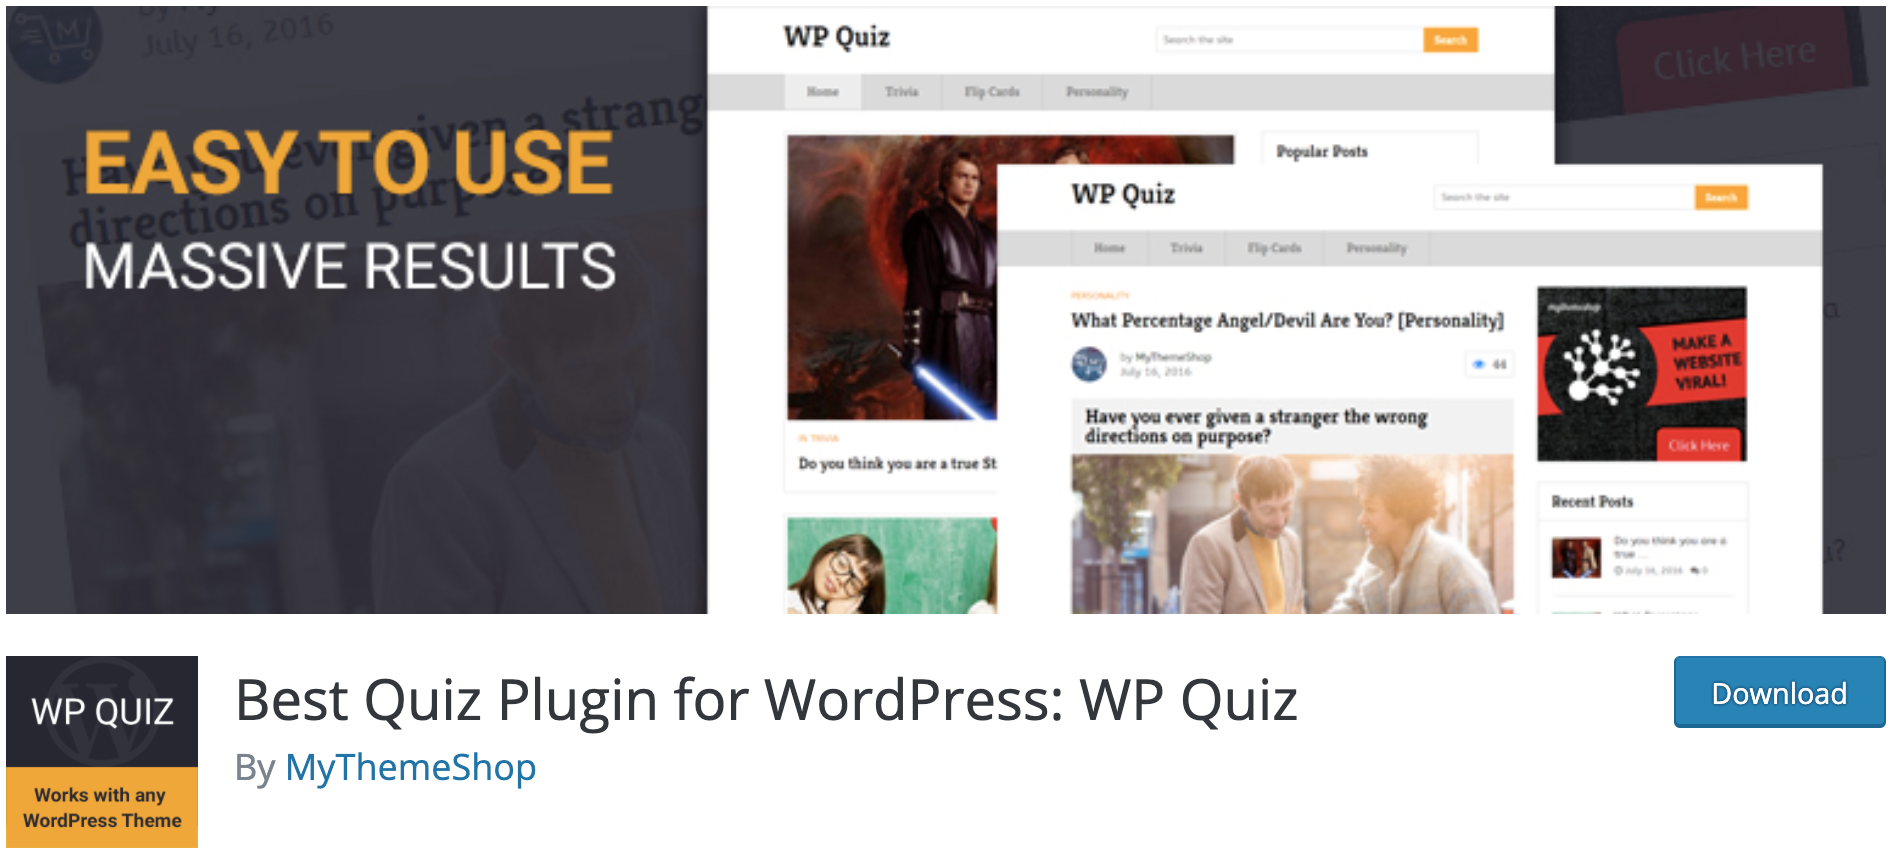 Best Quiz Plugin for WordPress: WP Quiz on the official WP directory